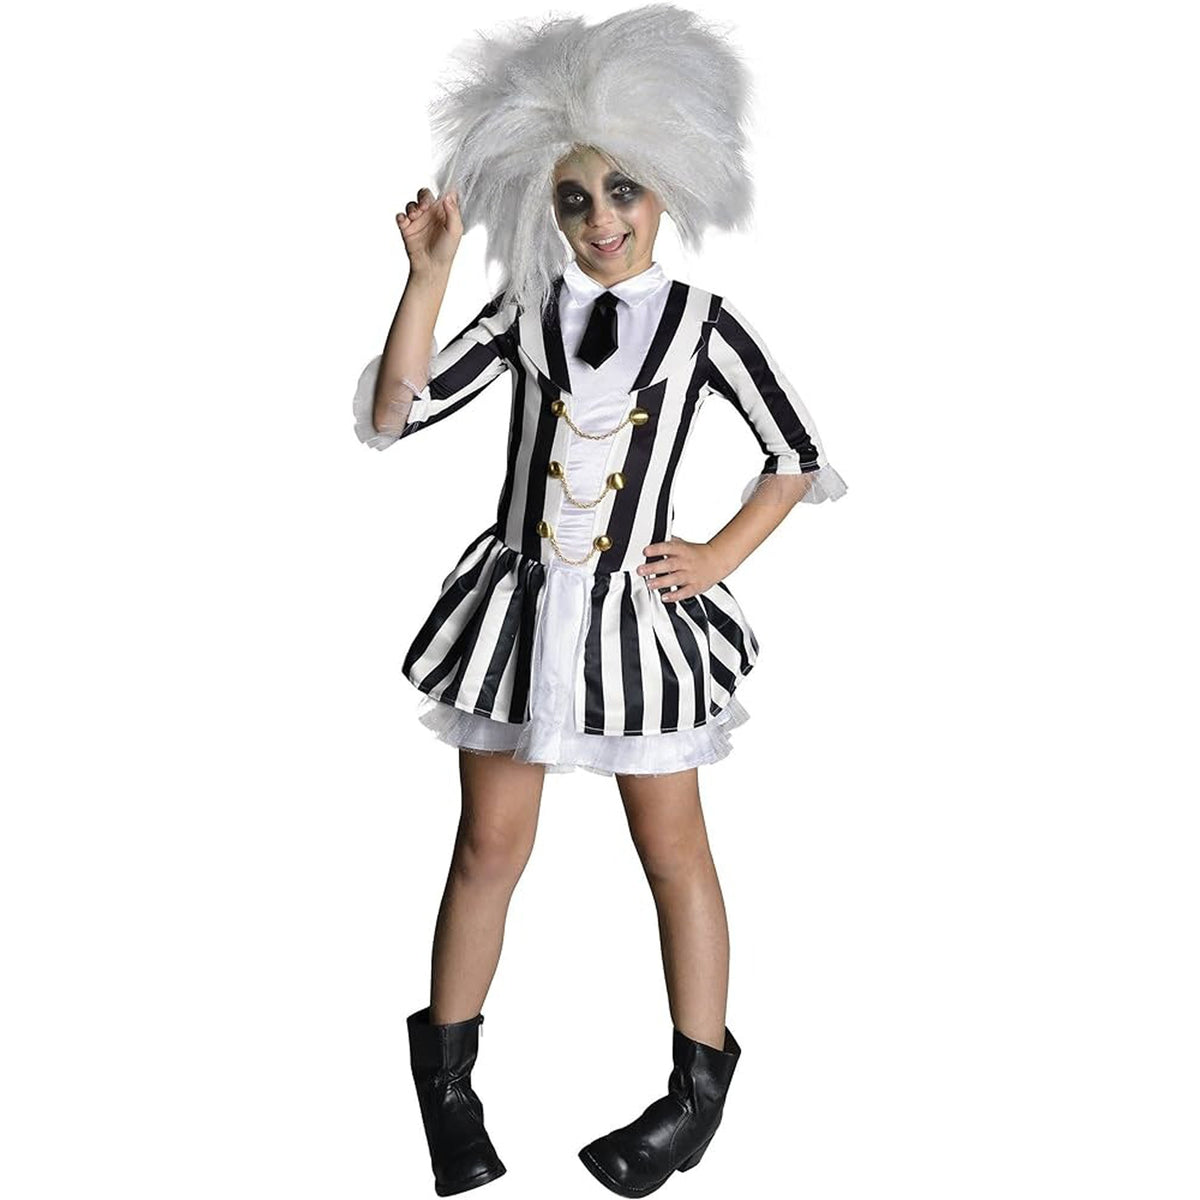 RUBIES II (Ruby Slipper Sales) Costumes Beetlejuice Costume for Kids, Black and White Striped Dress